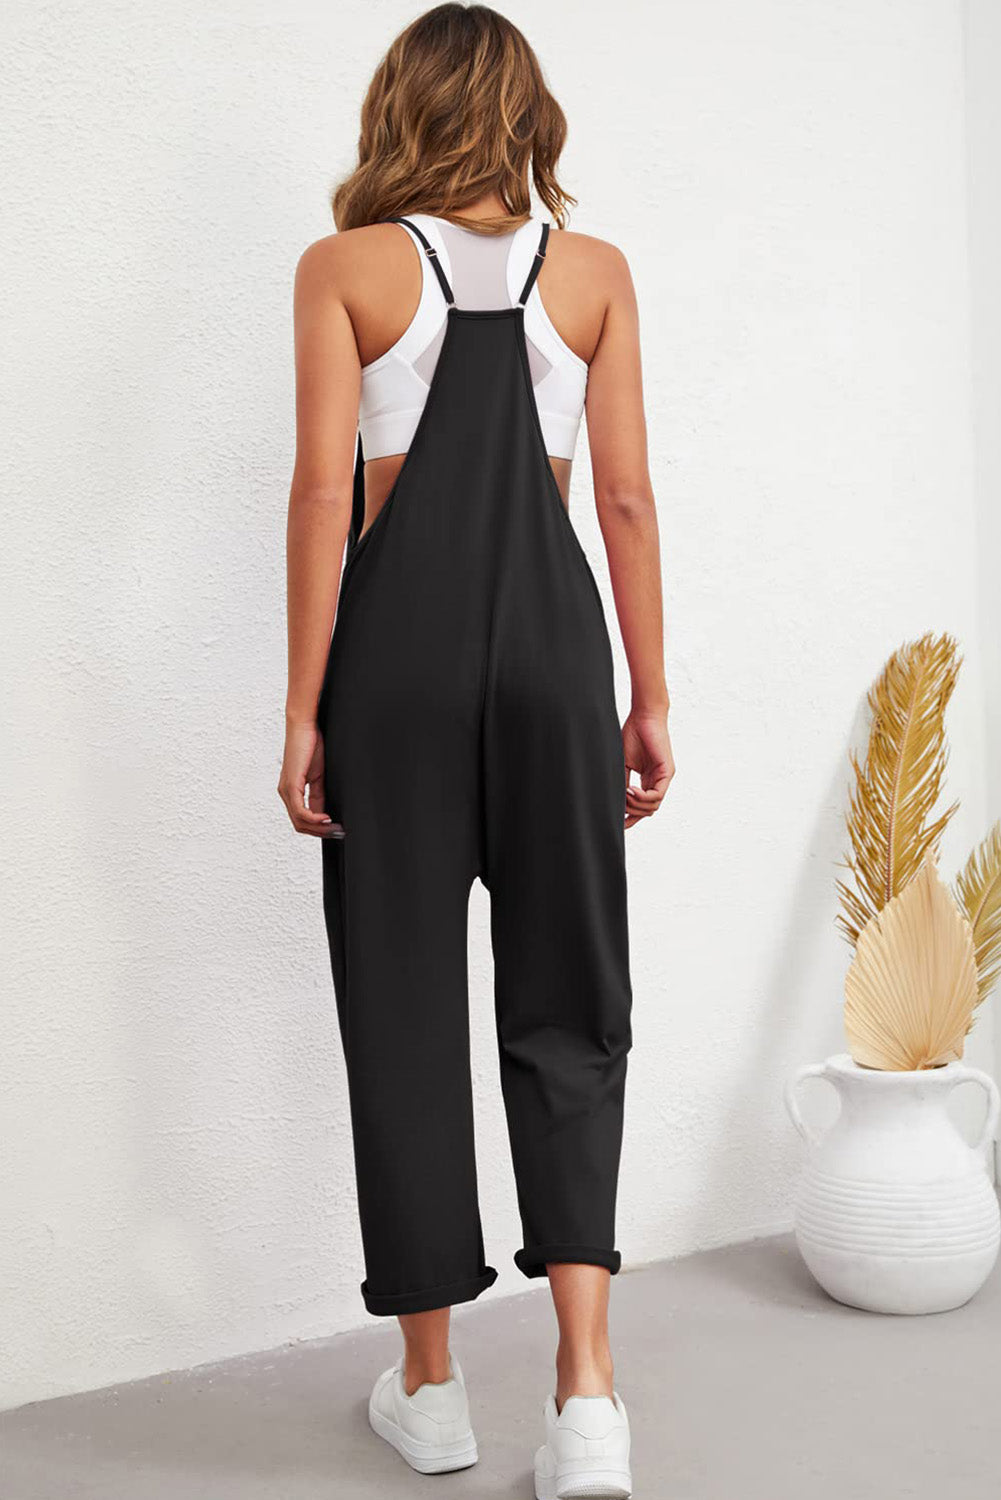 Jumpsuits for Women Spaghetti Strap Tie Rompers Palestine